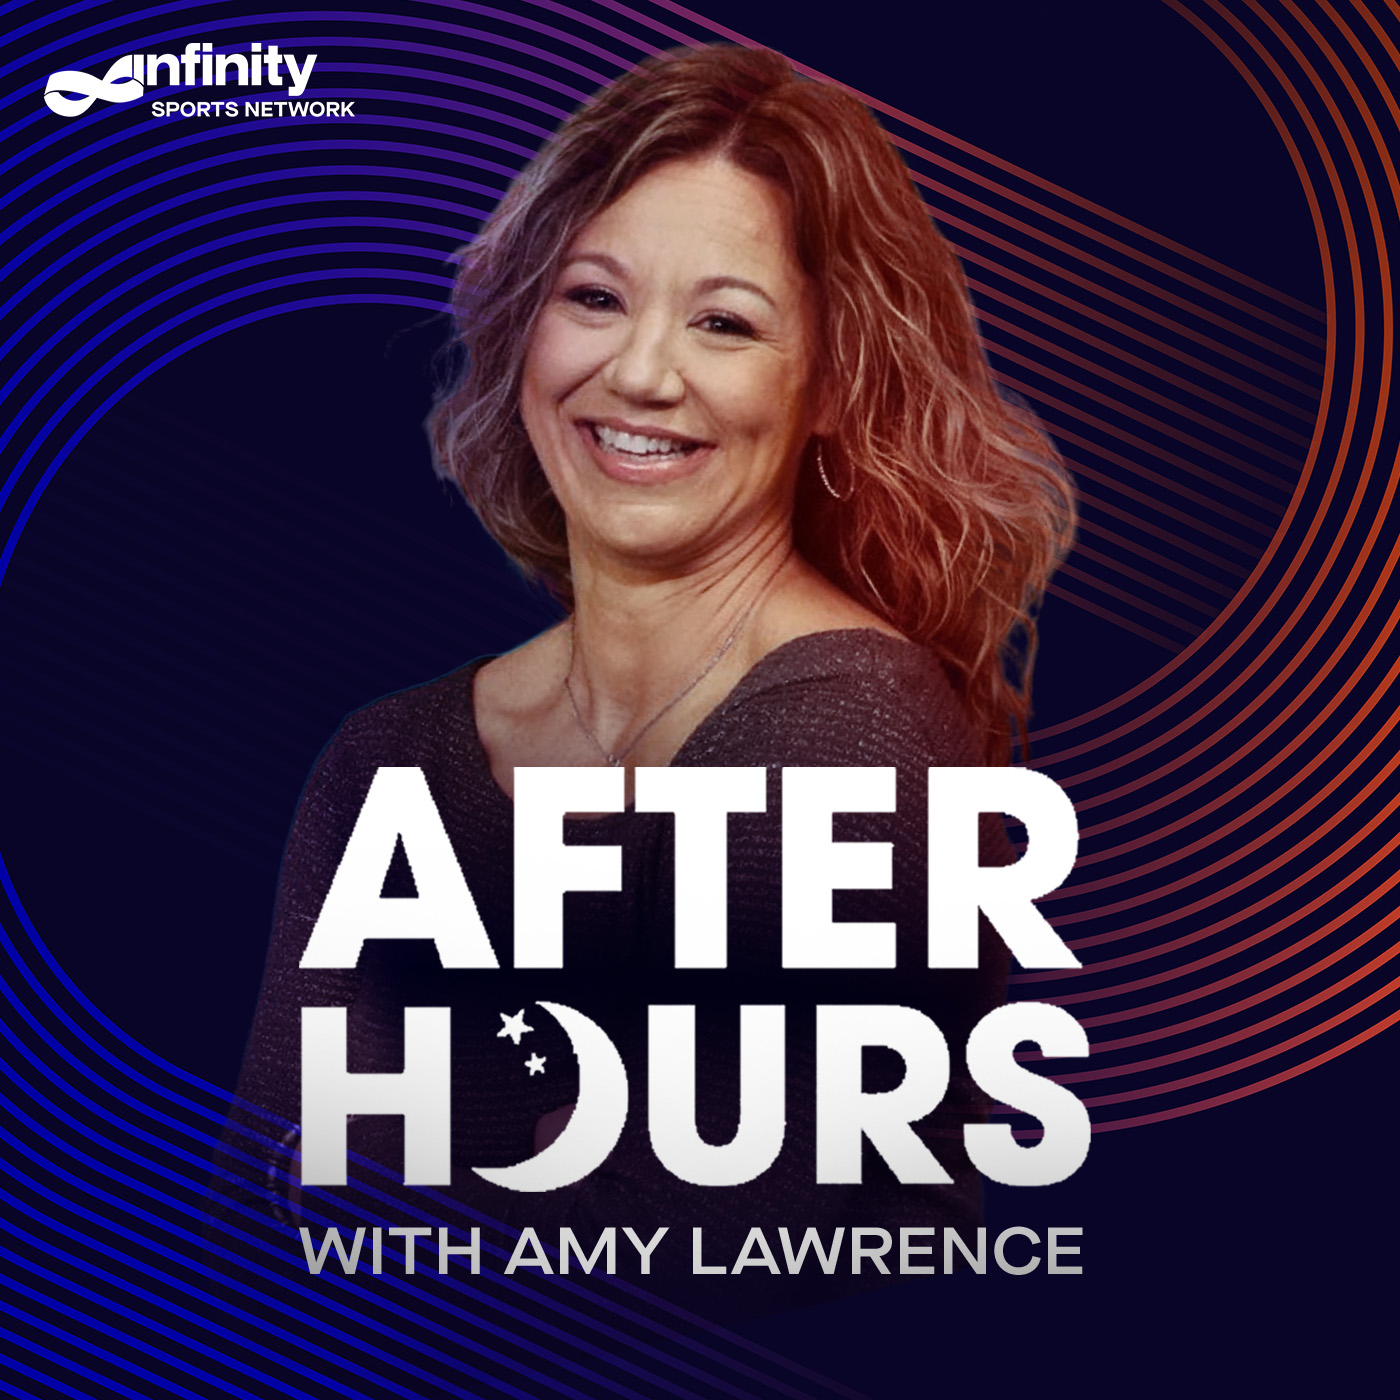 9-7-21 After Hours with Amy Lawrence PODCAST: Hour 1